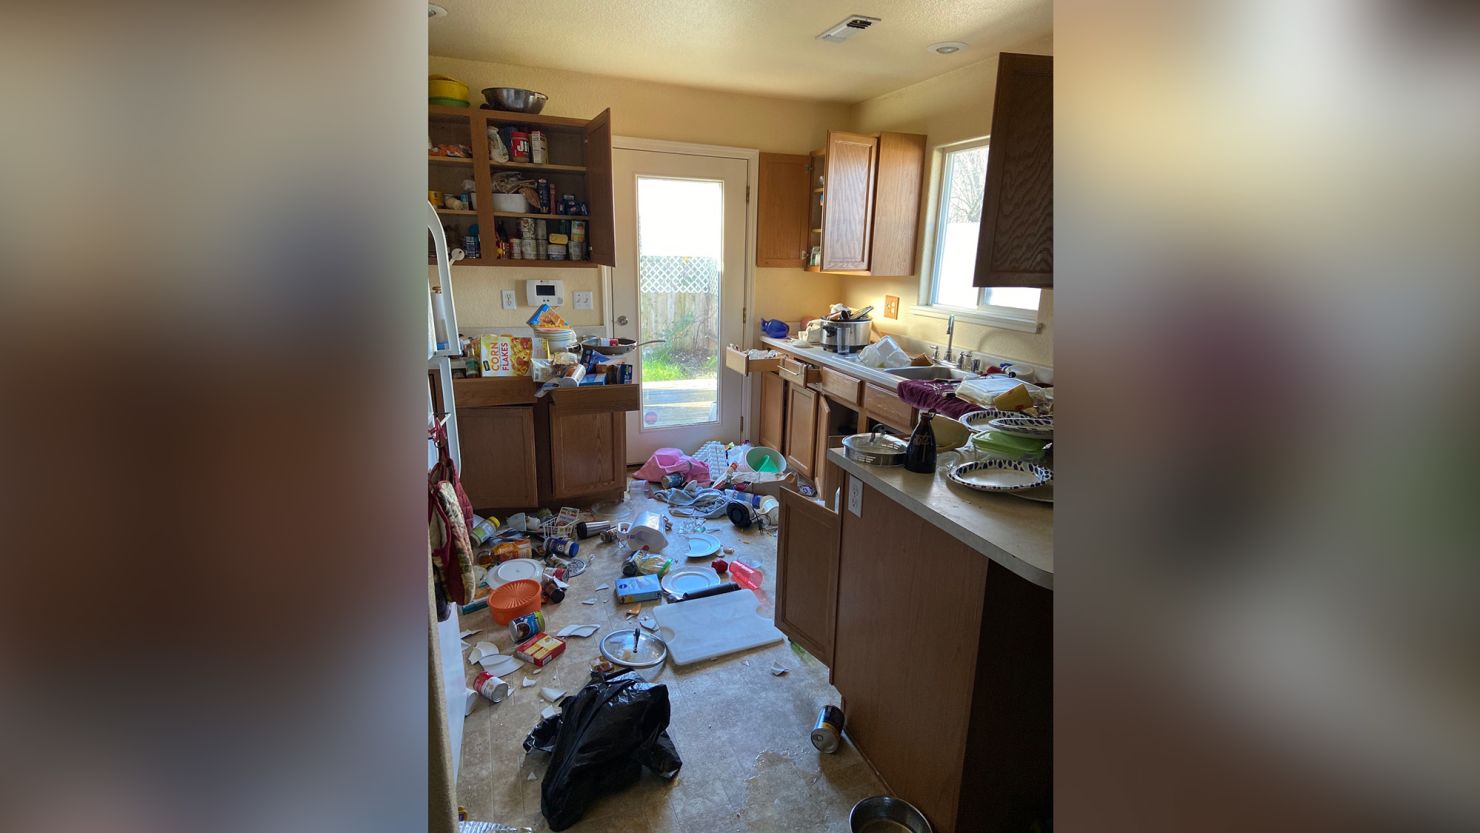 Ashley Germano told CNN that she felt her house in Rio Dell, California, shake for about 10 seconds when a 5.4 earthquake struck the city and the surrounding area on Sunday. "I was in my room, it only lasted about 10 seconds, but the shake was extreme, " Germano said.